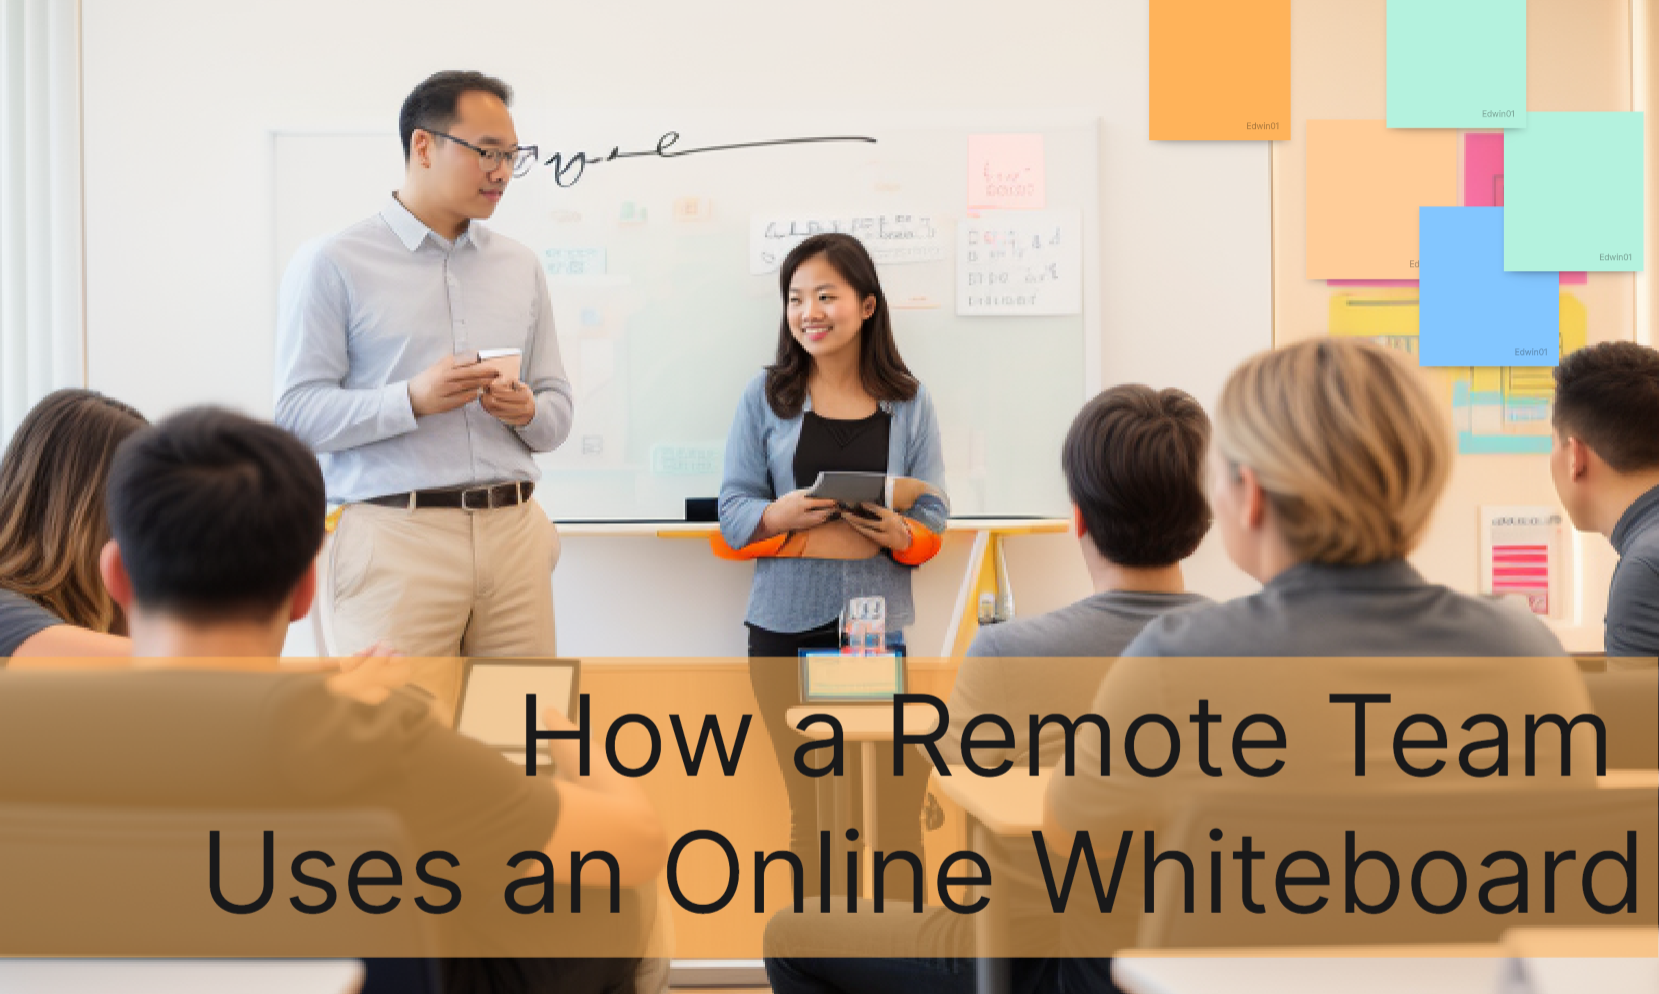 Case Study: How a Remote Team Uses an Online Whiteboard